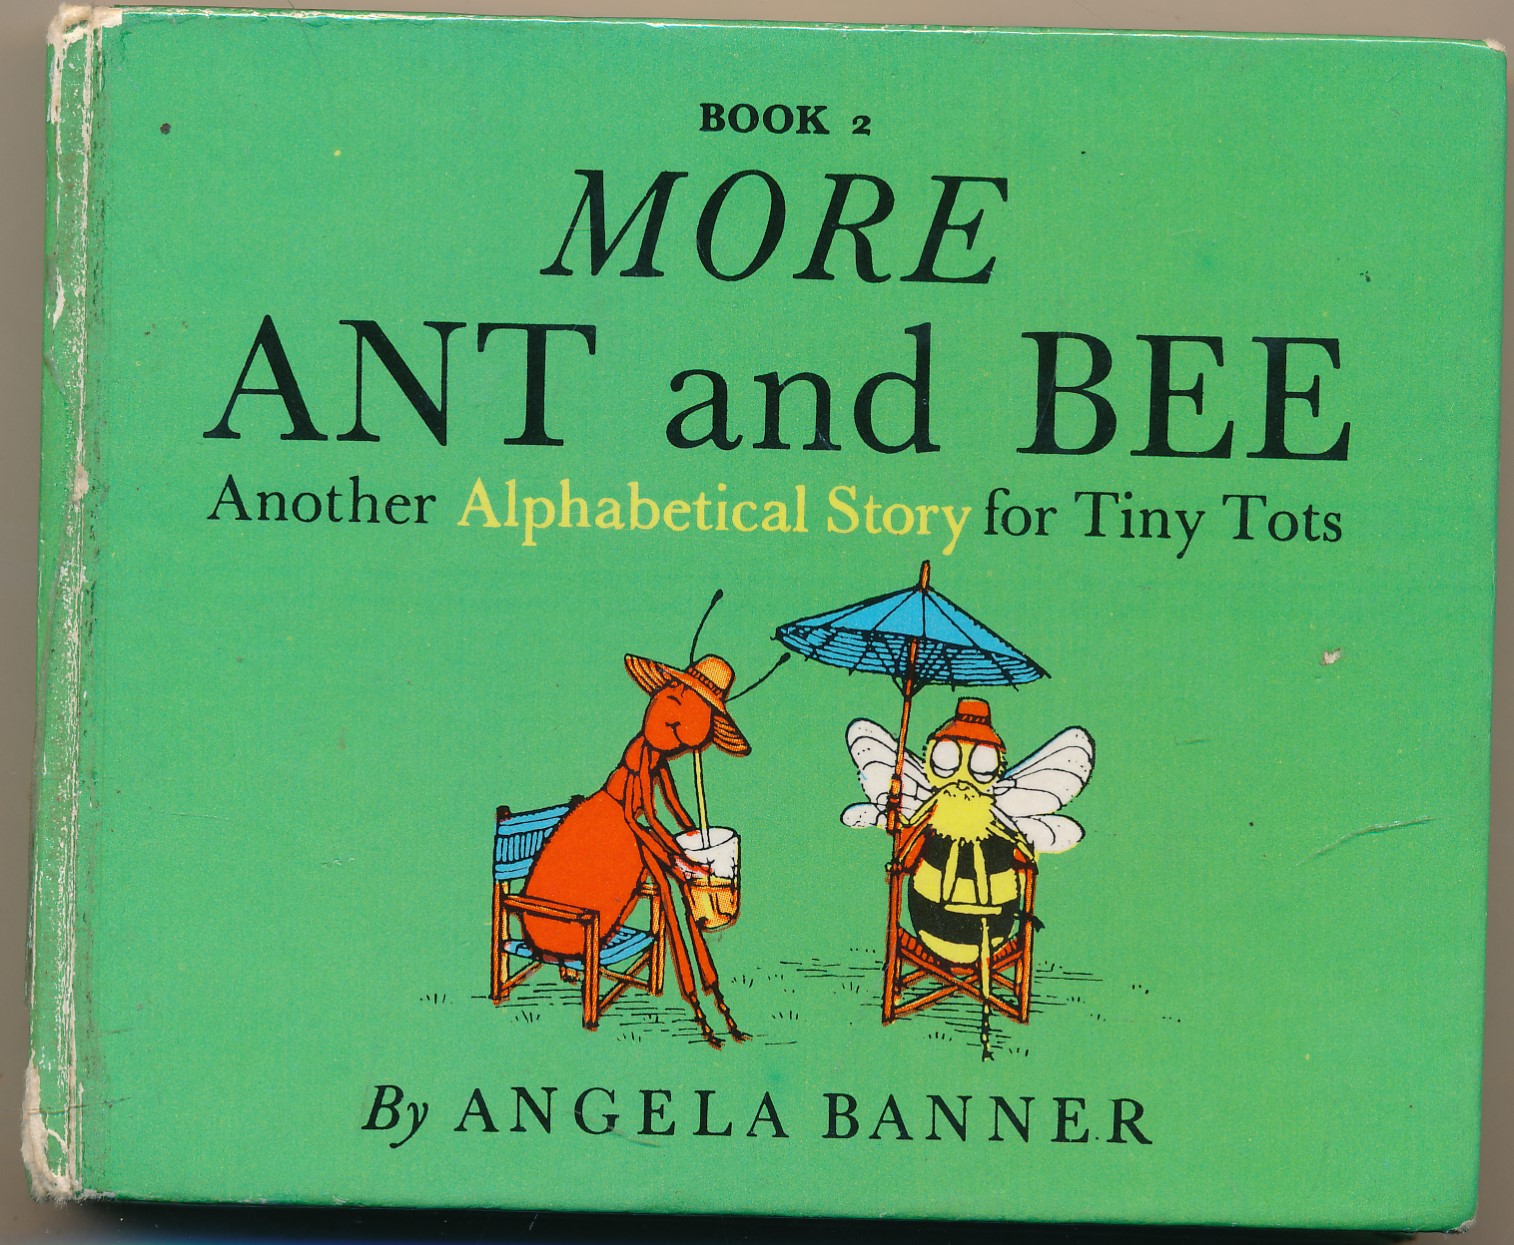 More Ant and Bee - Another Alphabetical Story